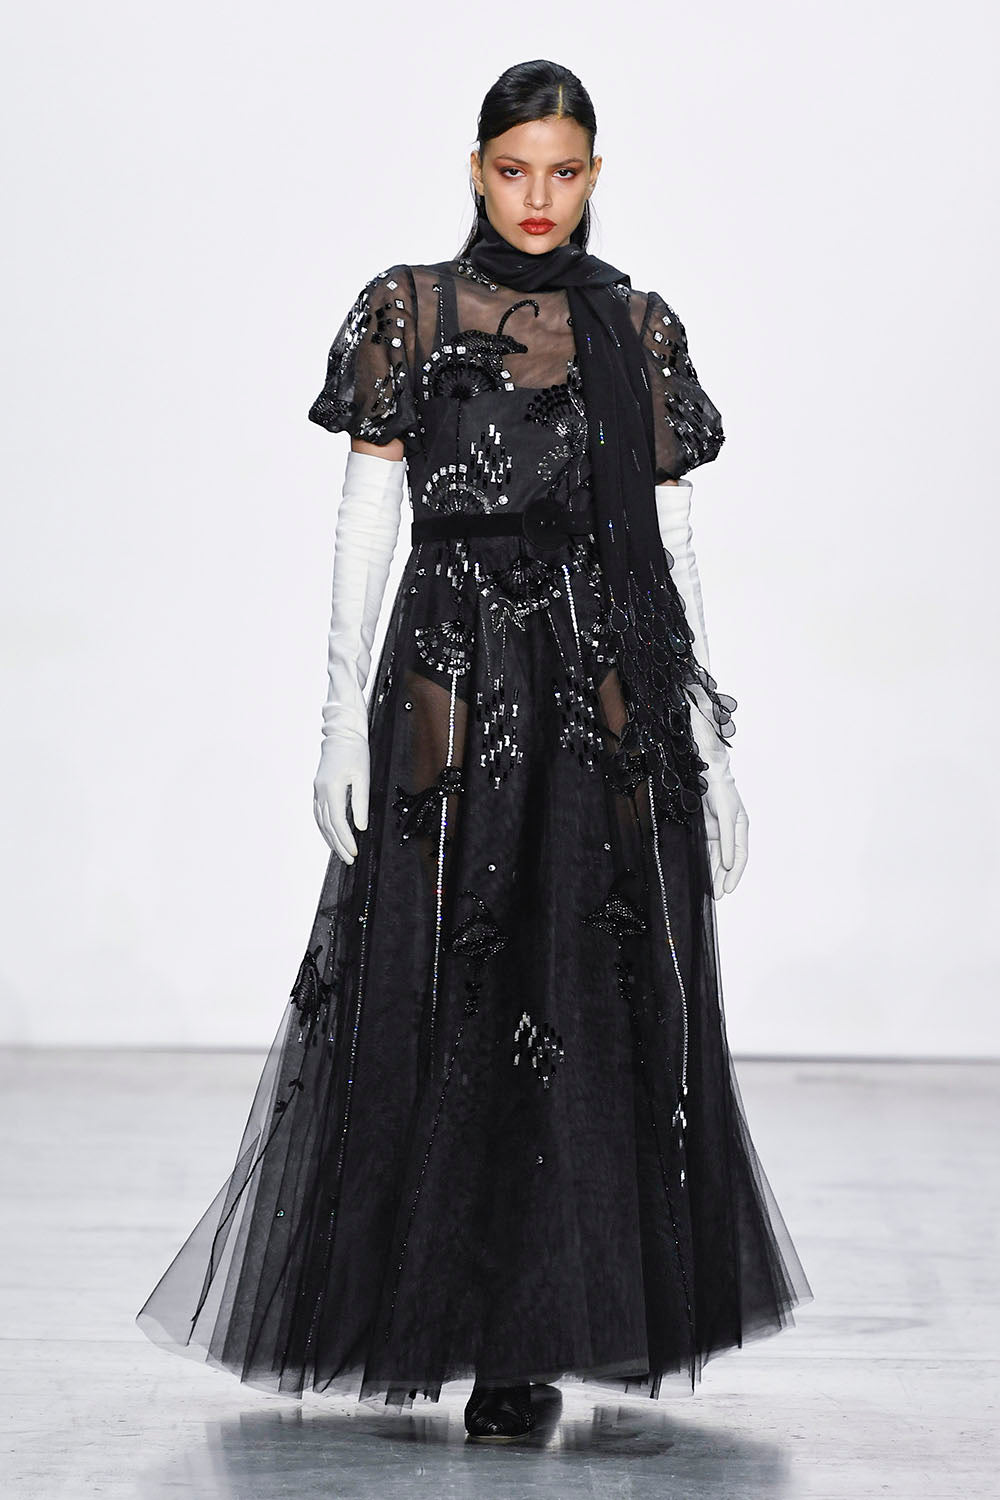 Onyx Deco Petal Embroidered Tulle Gown with Lantern Sleeves